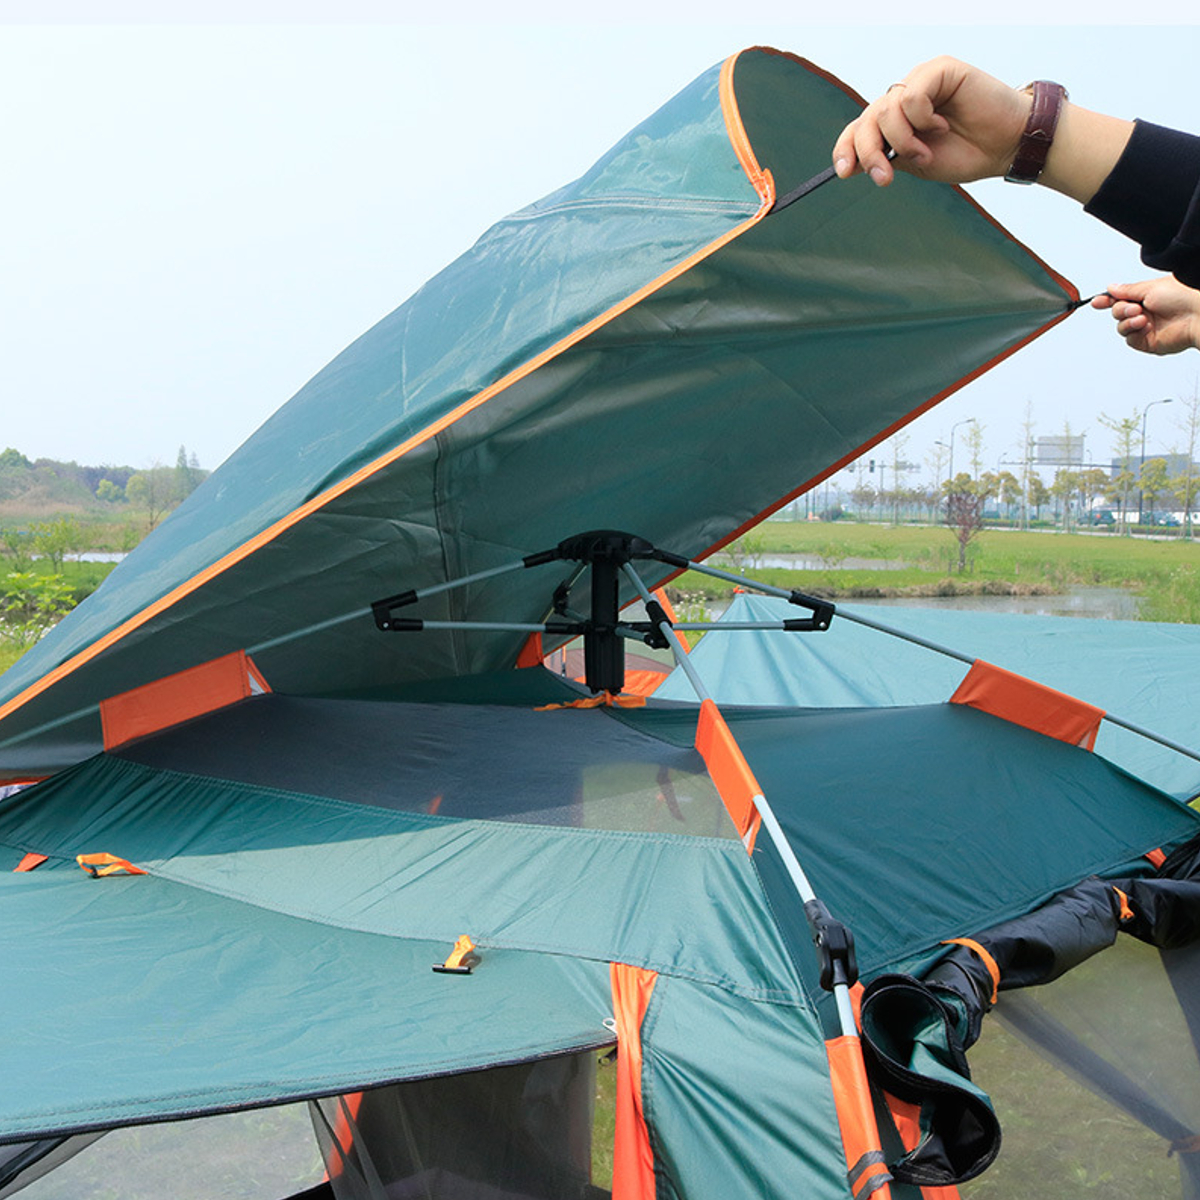 4-5 People Fully Automatic Set-up Tent UV Protected Family Picnic Travel Sun Shelters Outdoor Rainproof Windproof Camping Tents